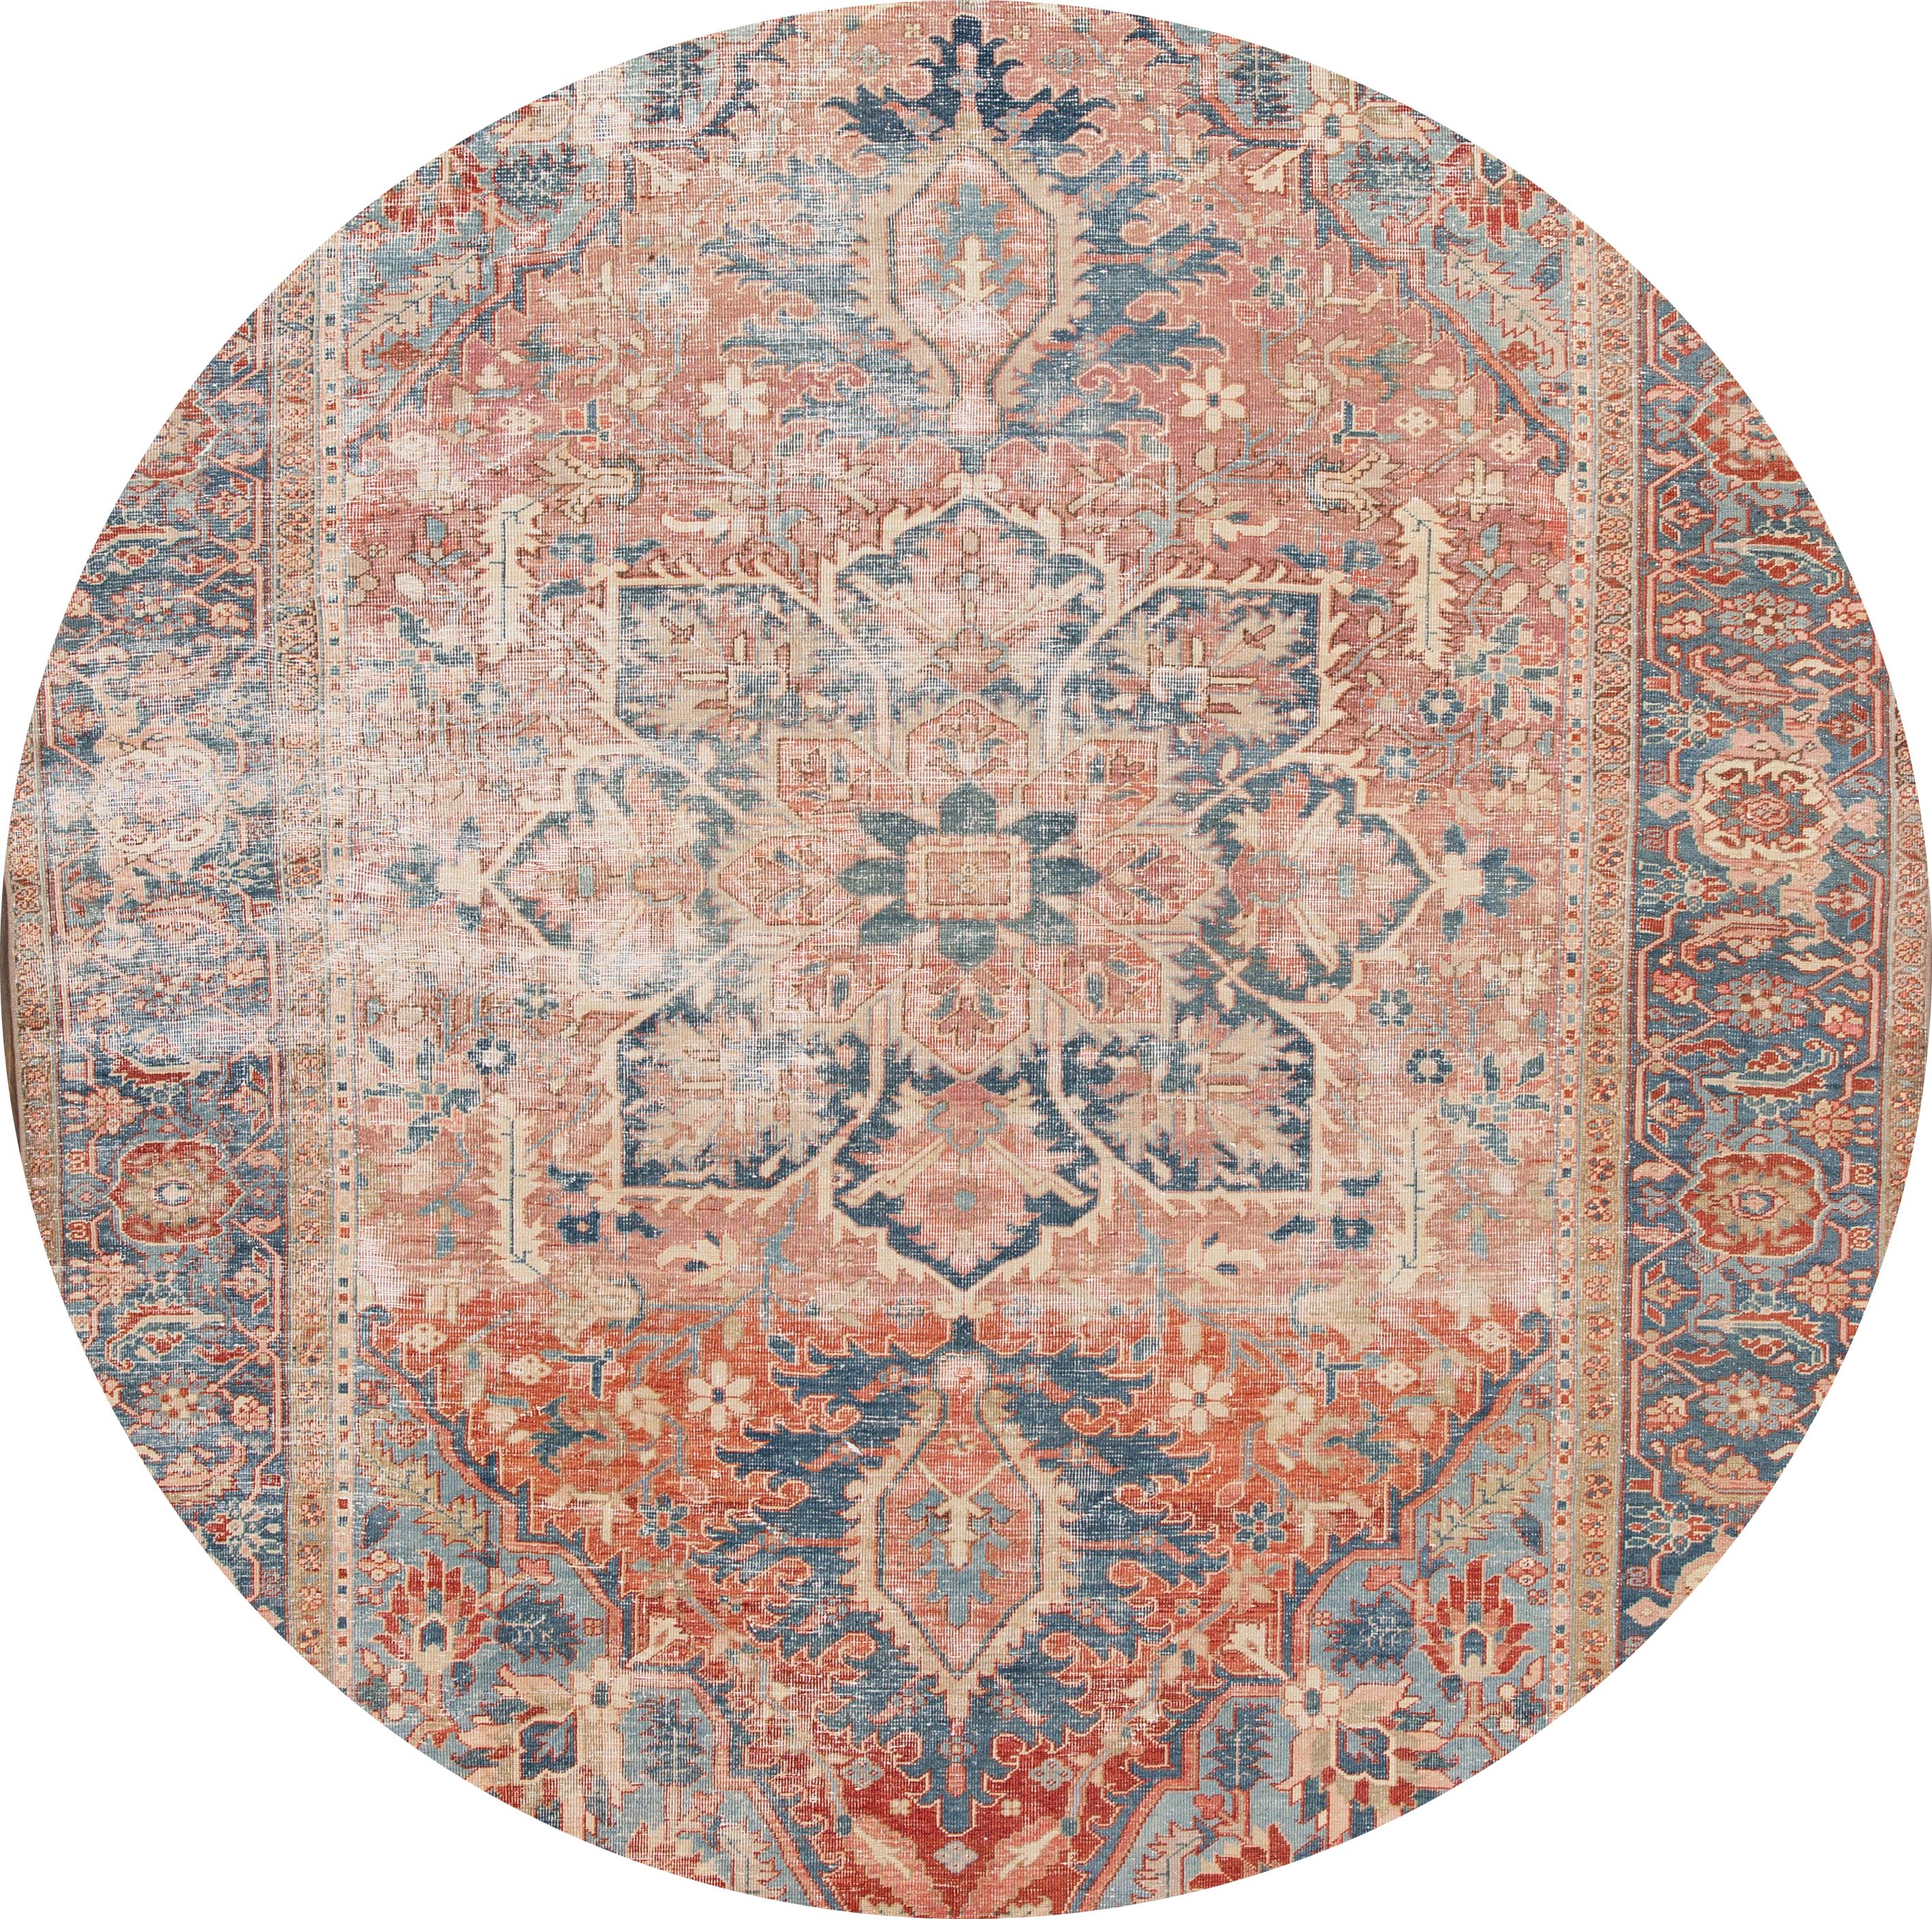 Beautiful antique Heriz rug, hand knotted wool with a peach field, red and blue accents in all-over center medallion design,

This rug measures 9' 6